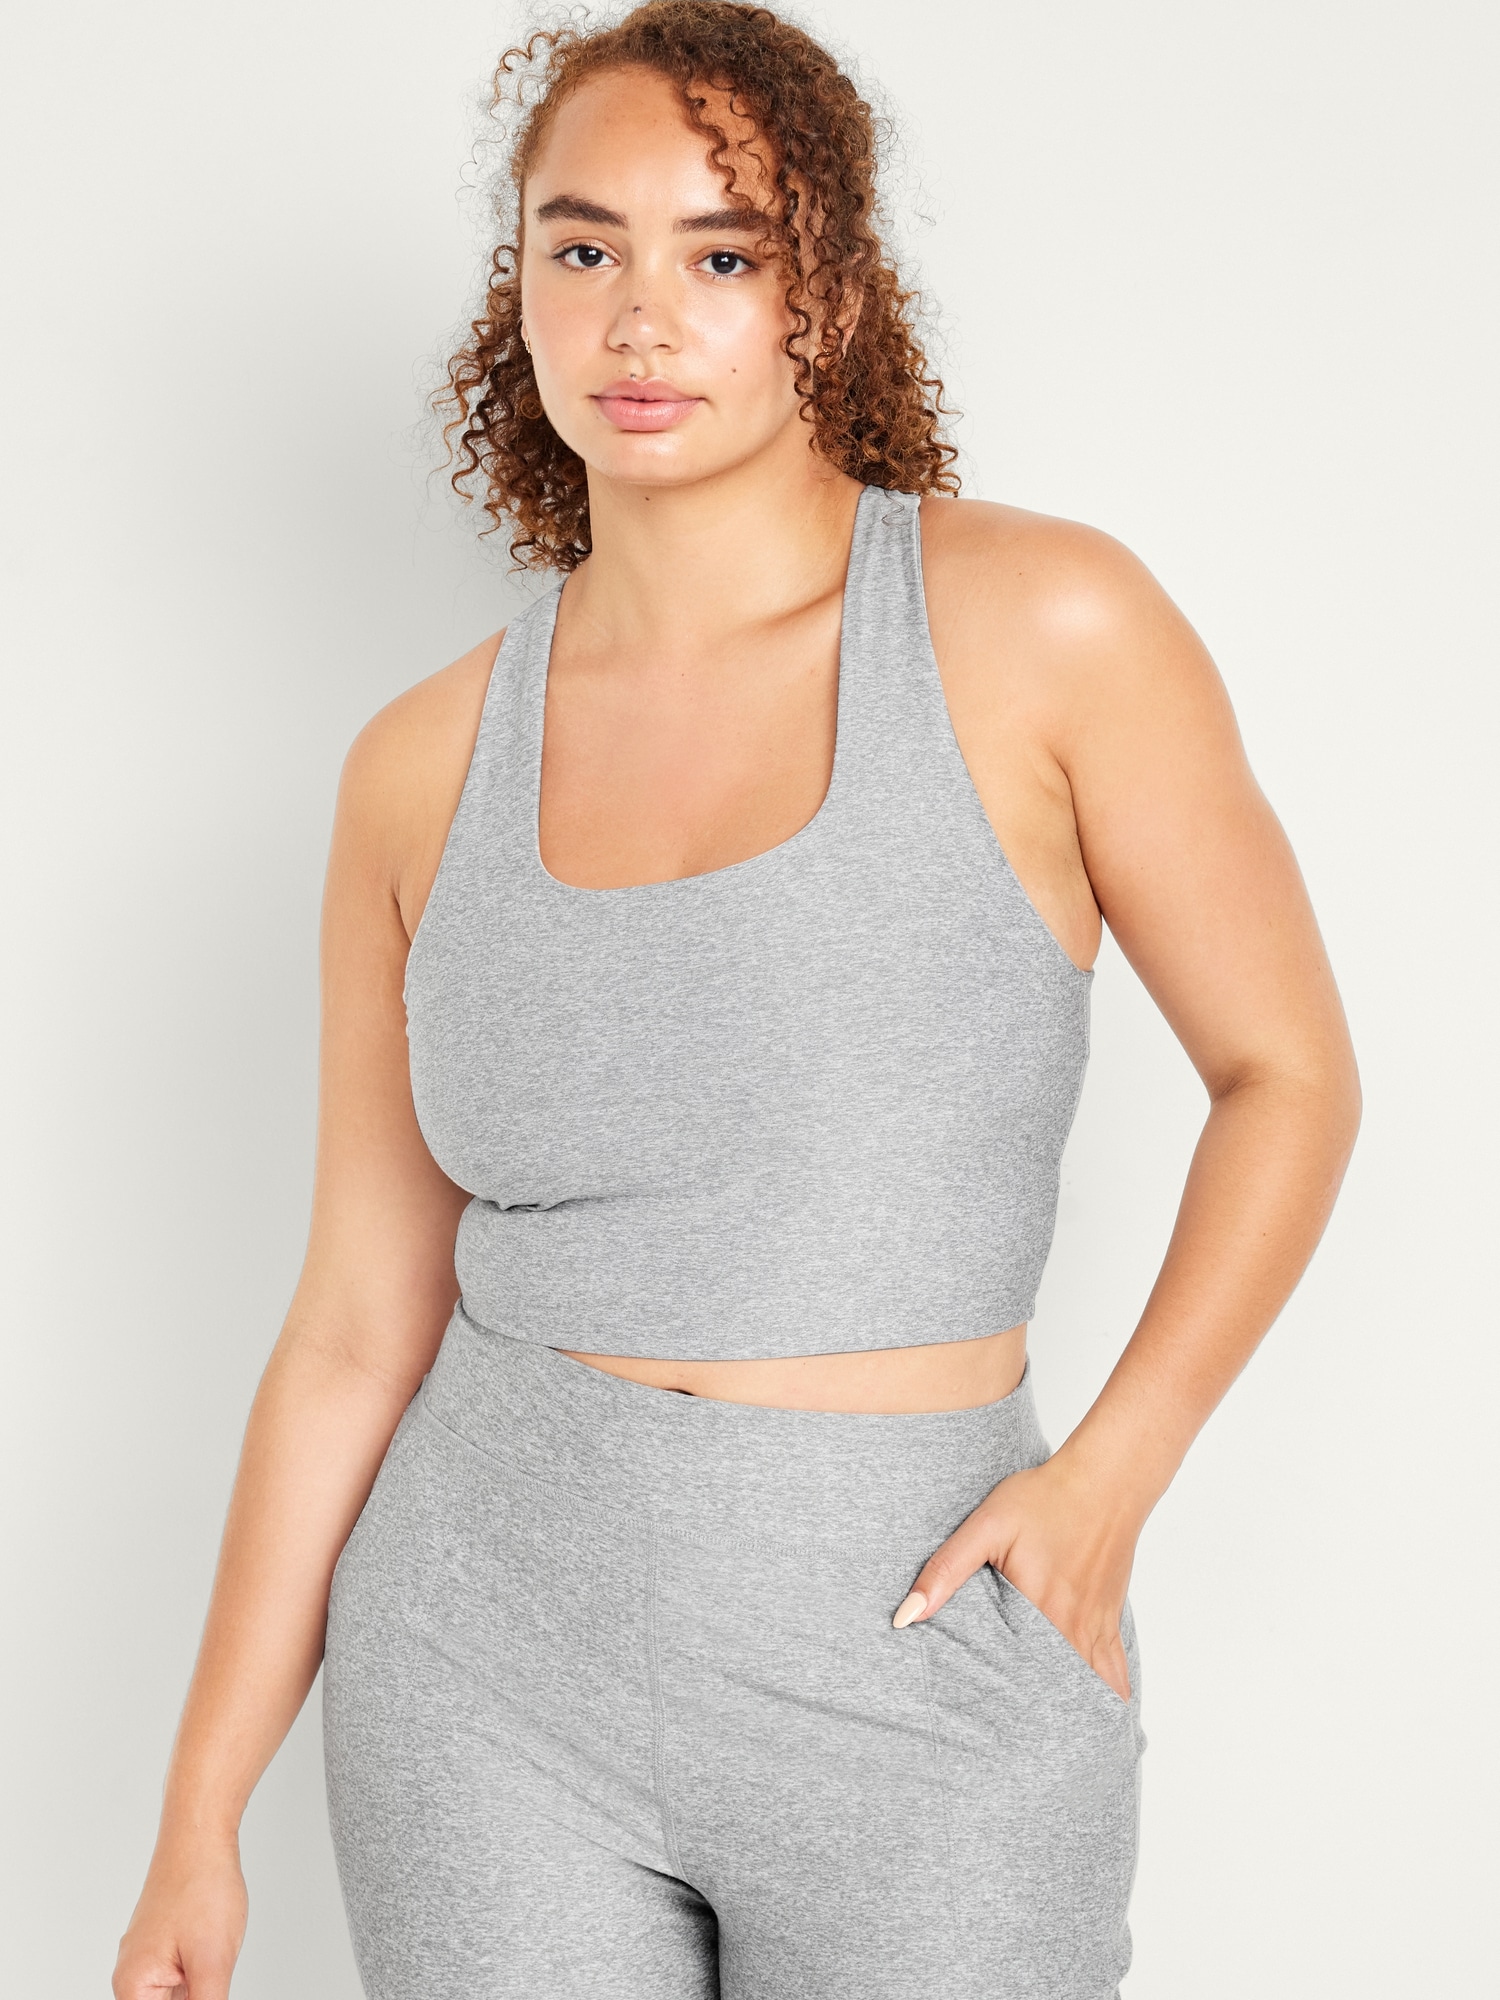 Upgrade Your Workout Wardrobe with the Grey Matter Longline Sports